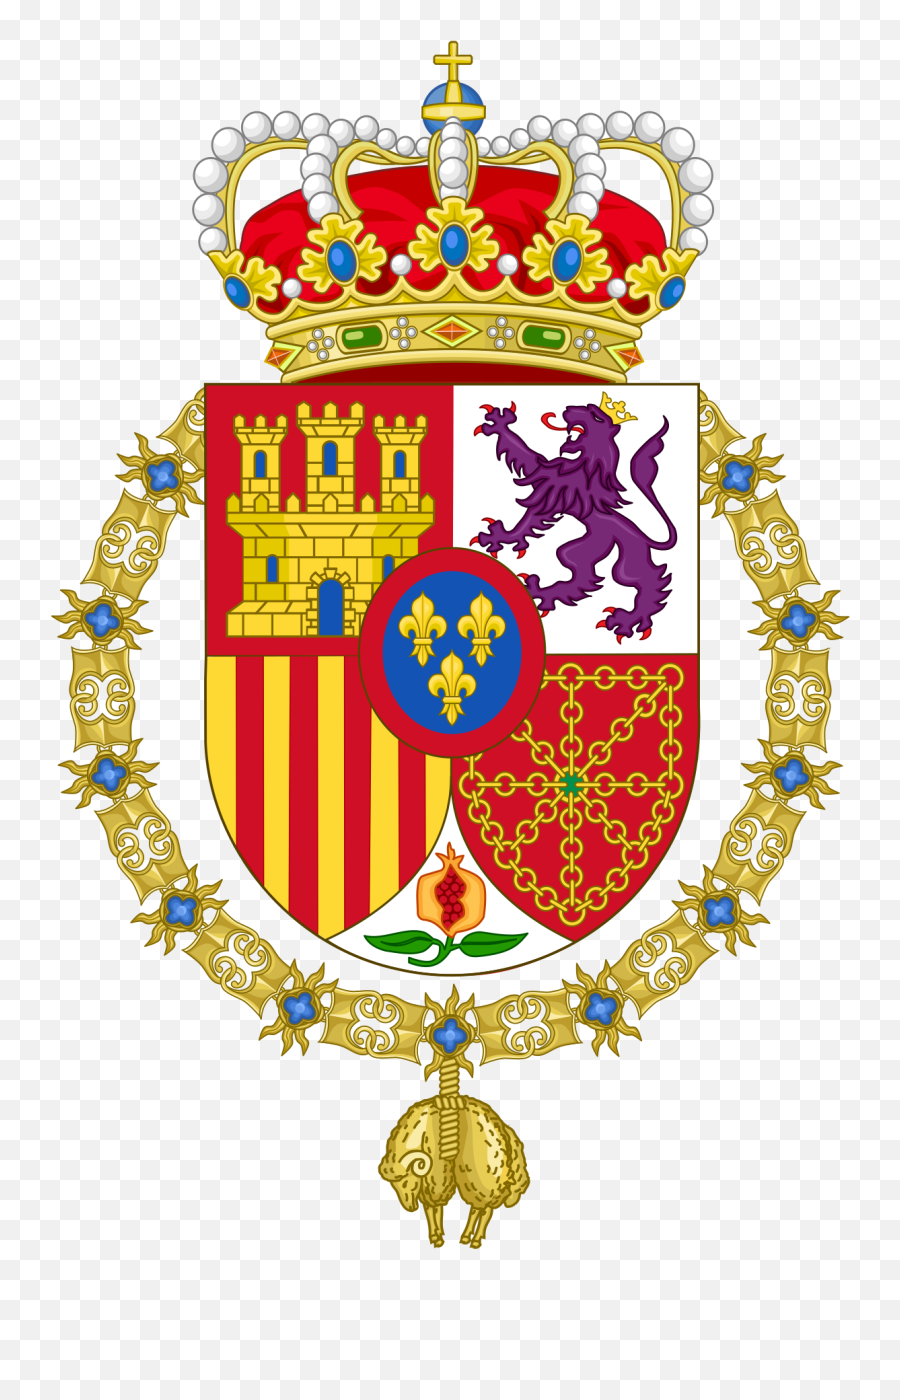 Coat Of Arms Of The King Of Spain - Wikipedia Emoji,Princess Crown Emoticon